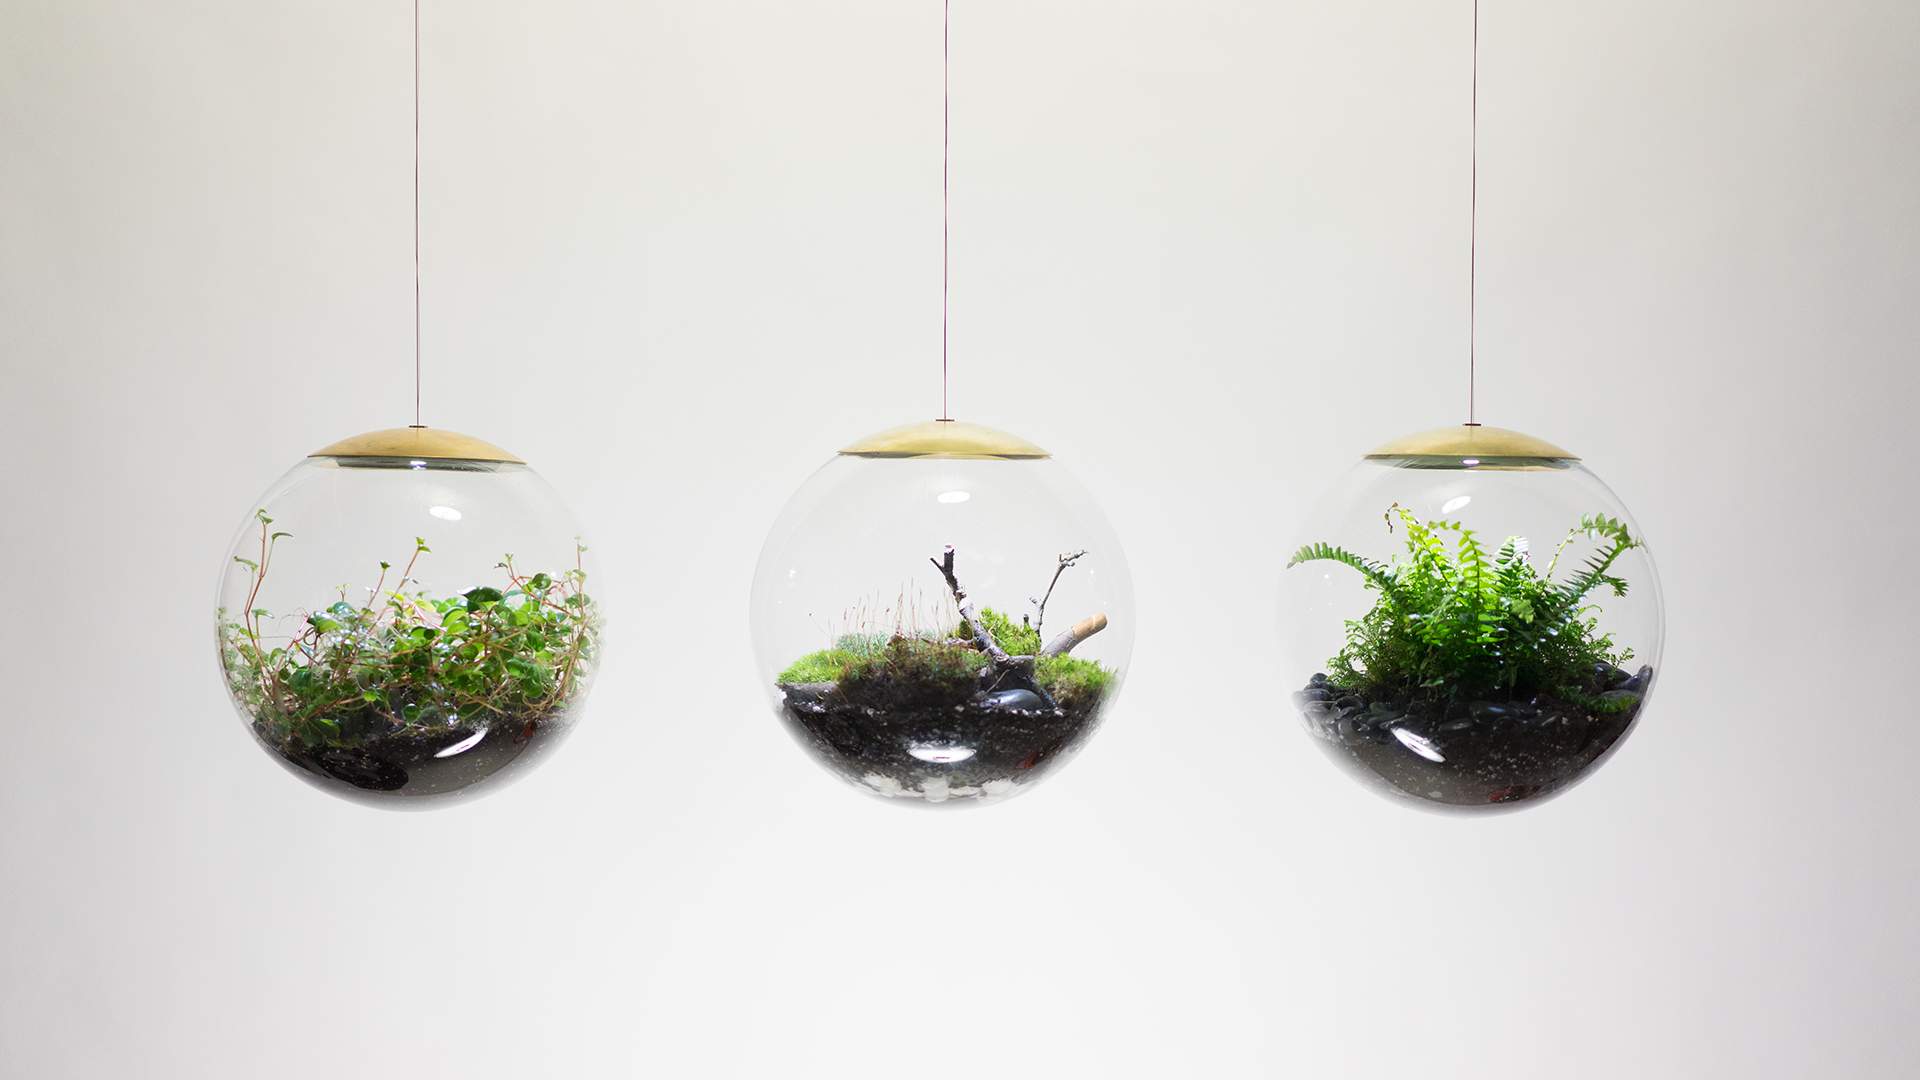 These Terrarium Lights Add a Mini Hanging Garden to Any Room